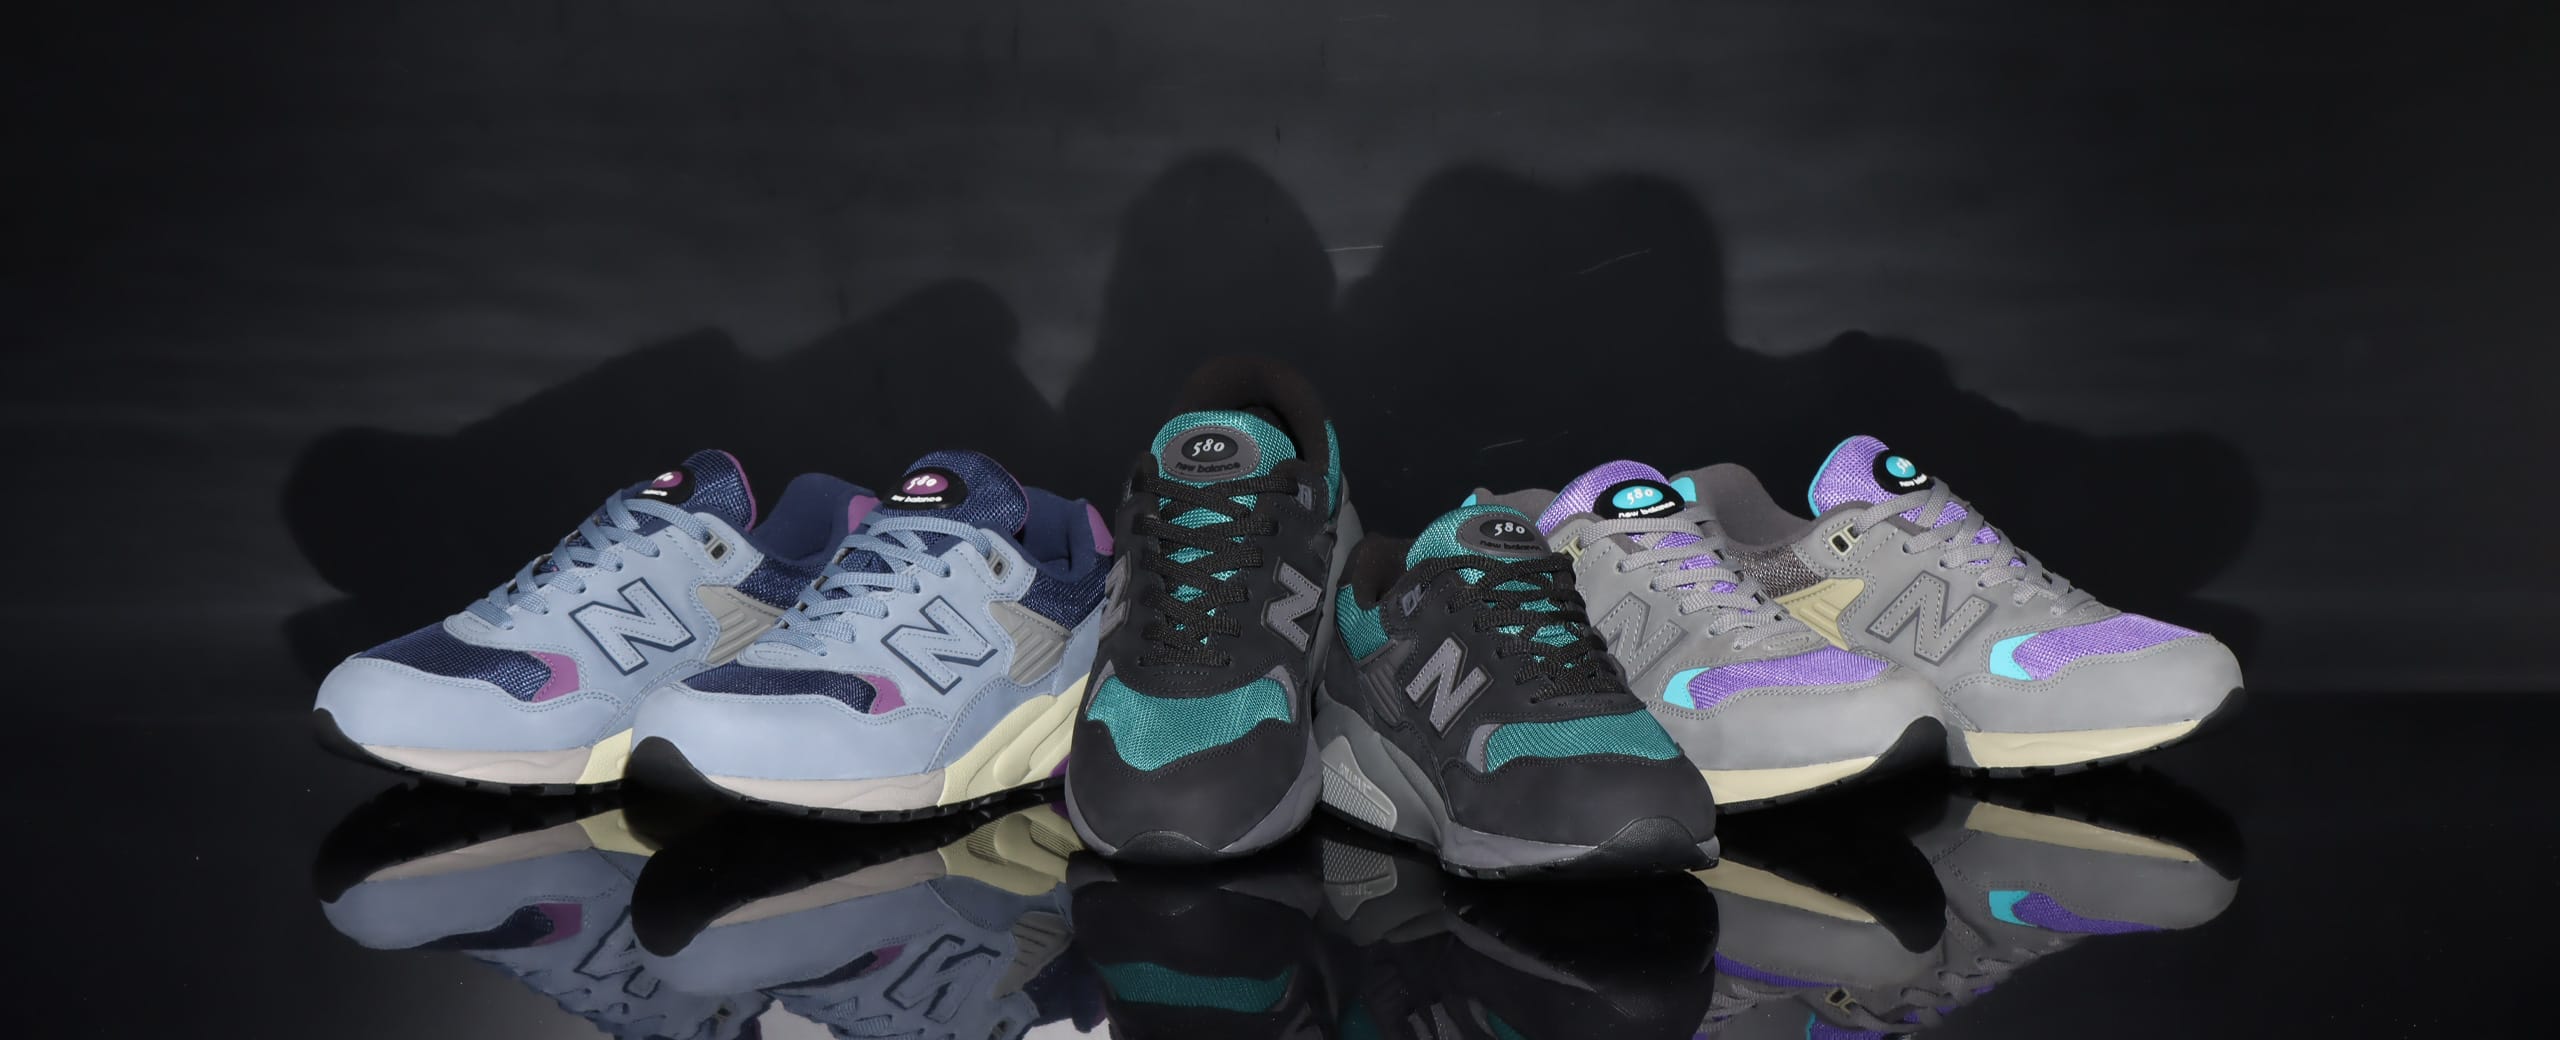 "New Balance MT580 New collection"